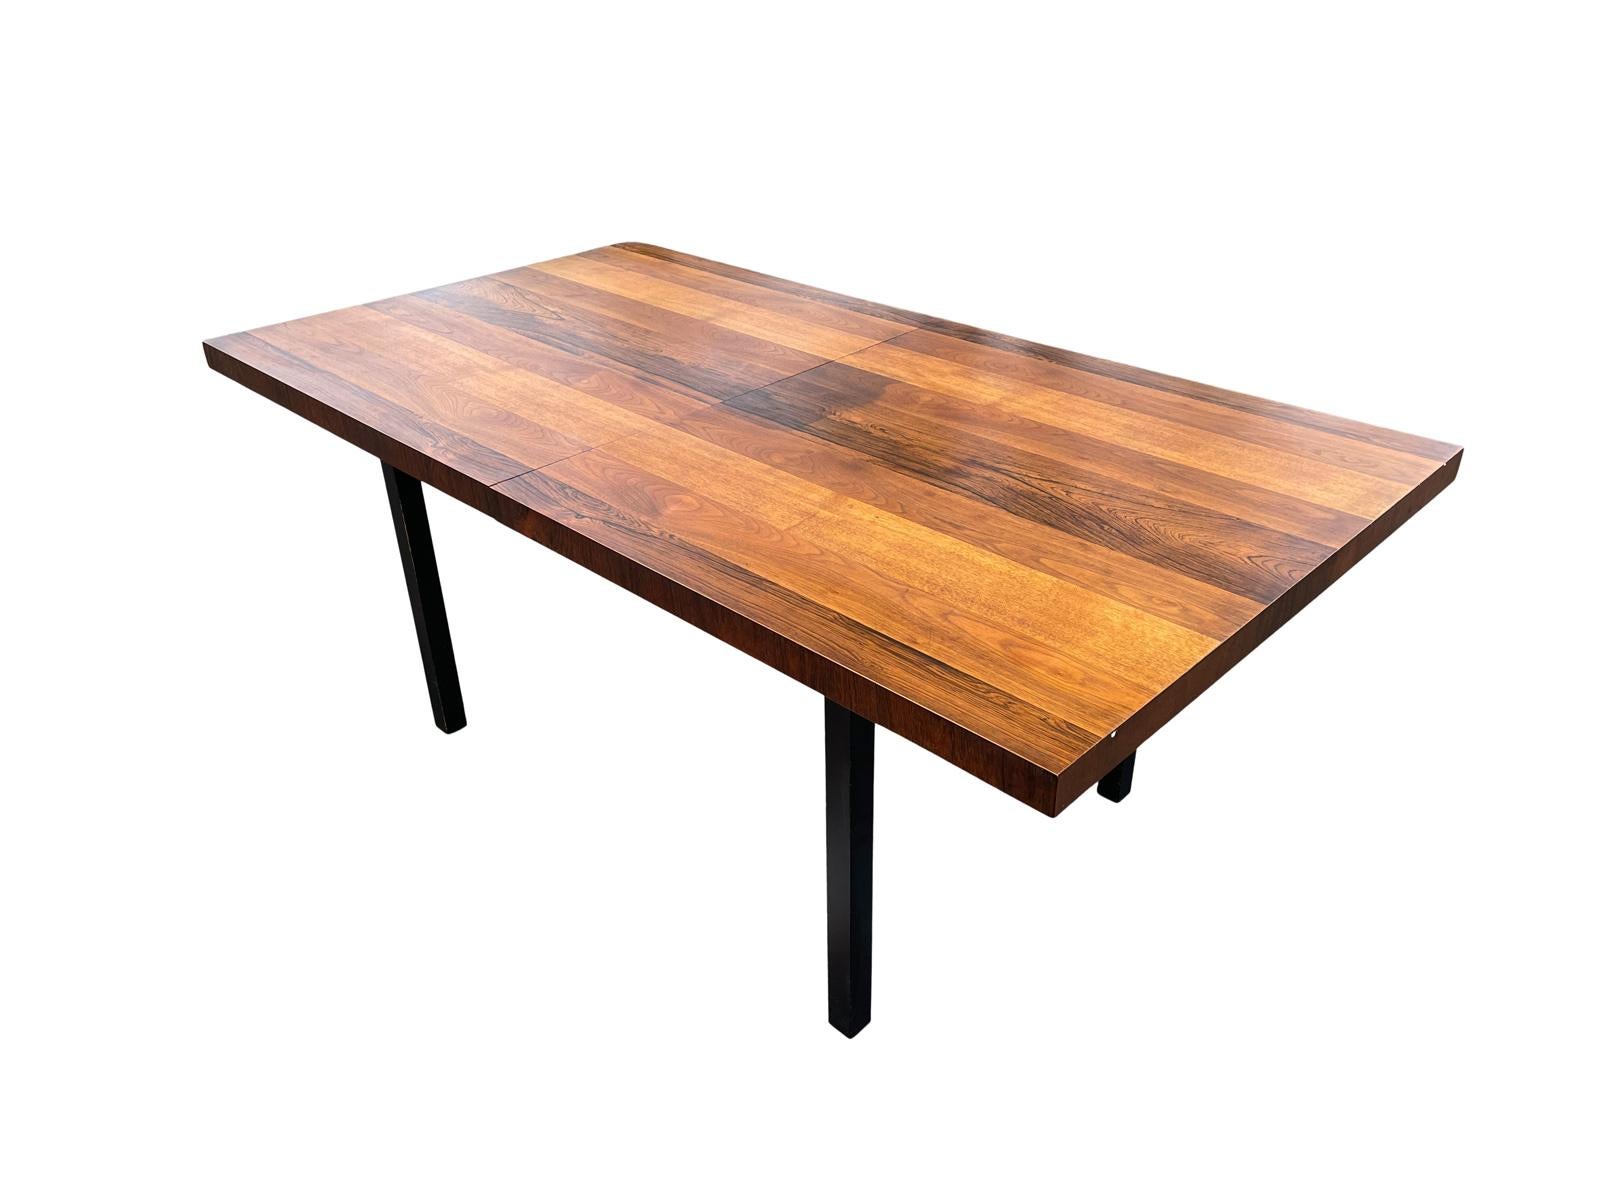 A very well crafted dining table with multi planked woods to the top giving it a sophisticated tailored feel. Using walnut, Brazilian rosewood and mahogany and having a satin black base makes this table seem like it's floating. The best part is that